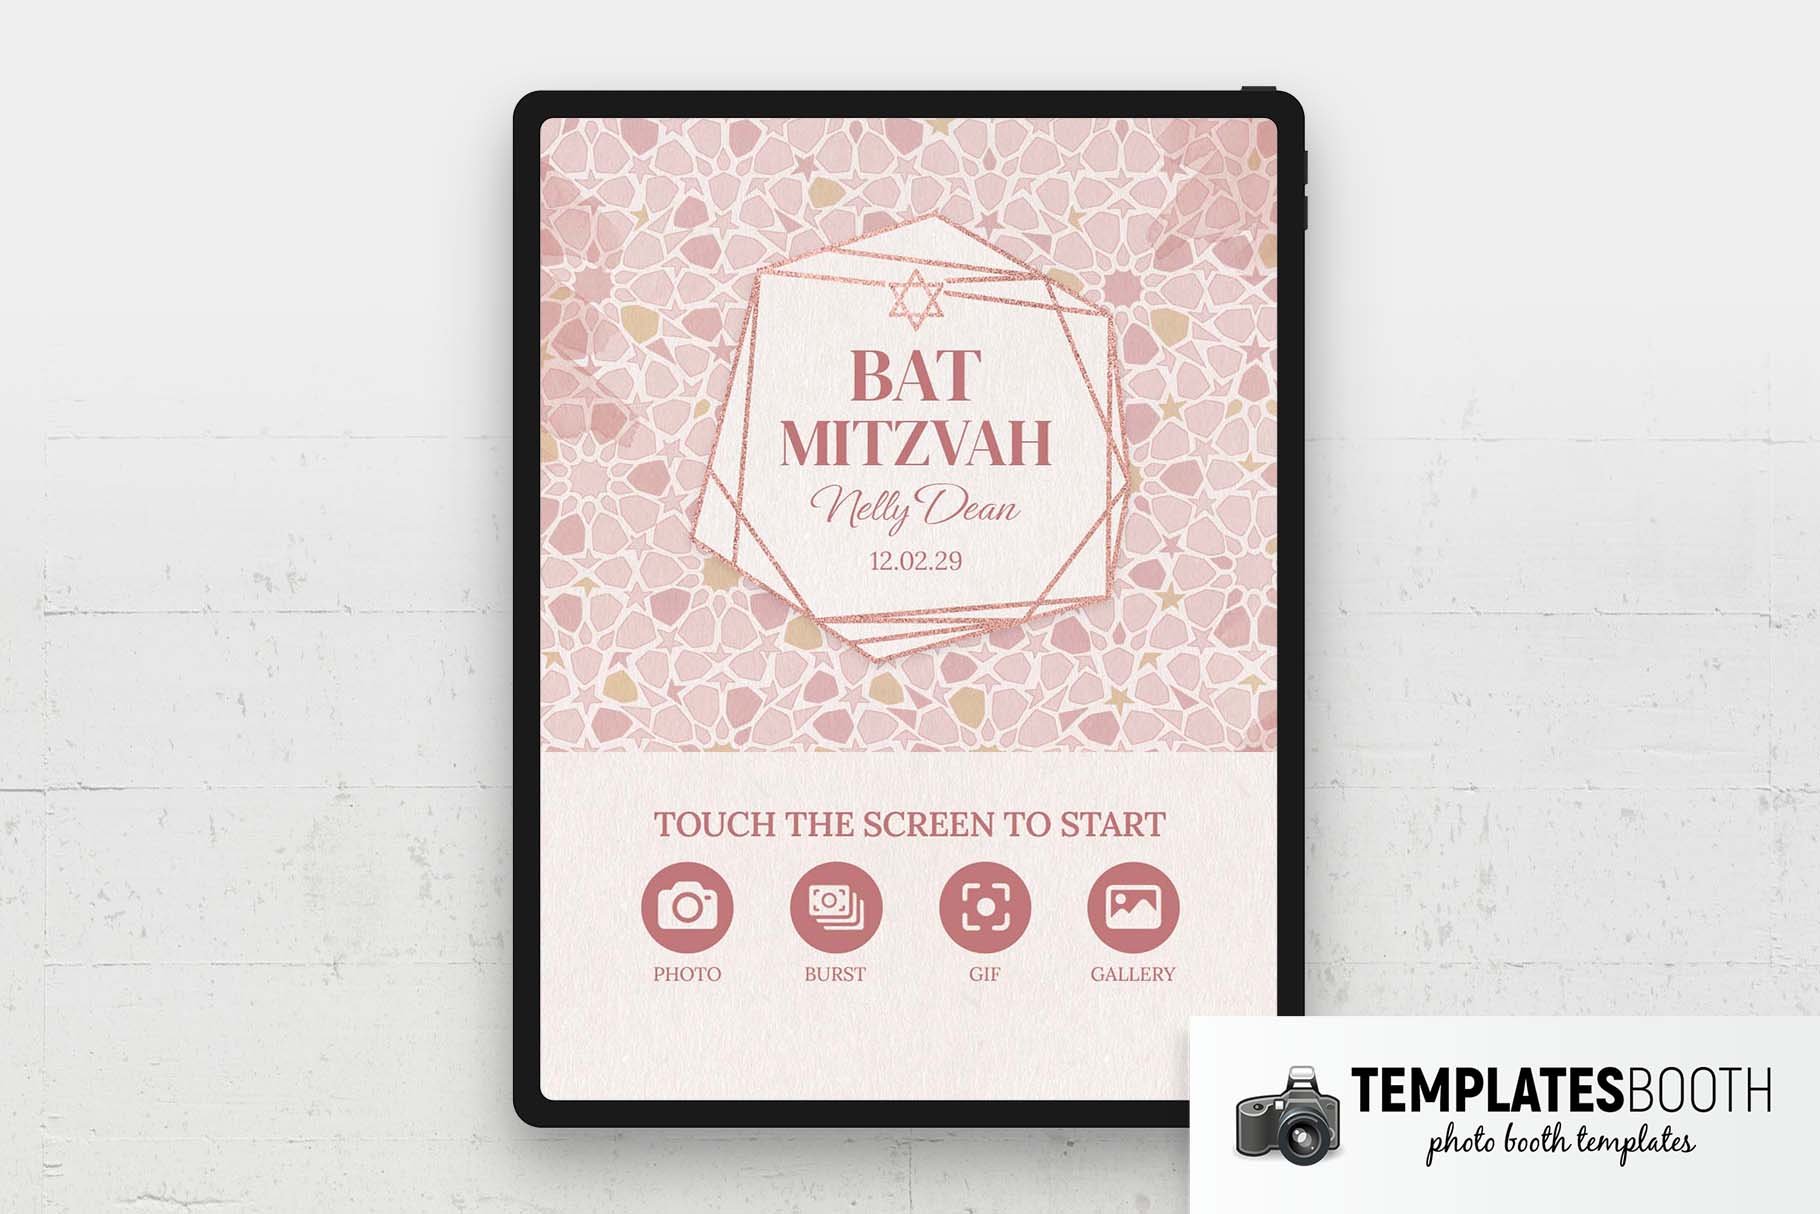 Bat Mitzvah Photo Booth Welcome Screen